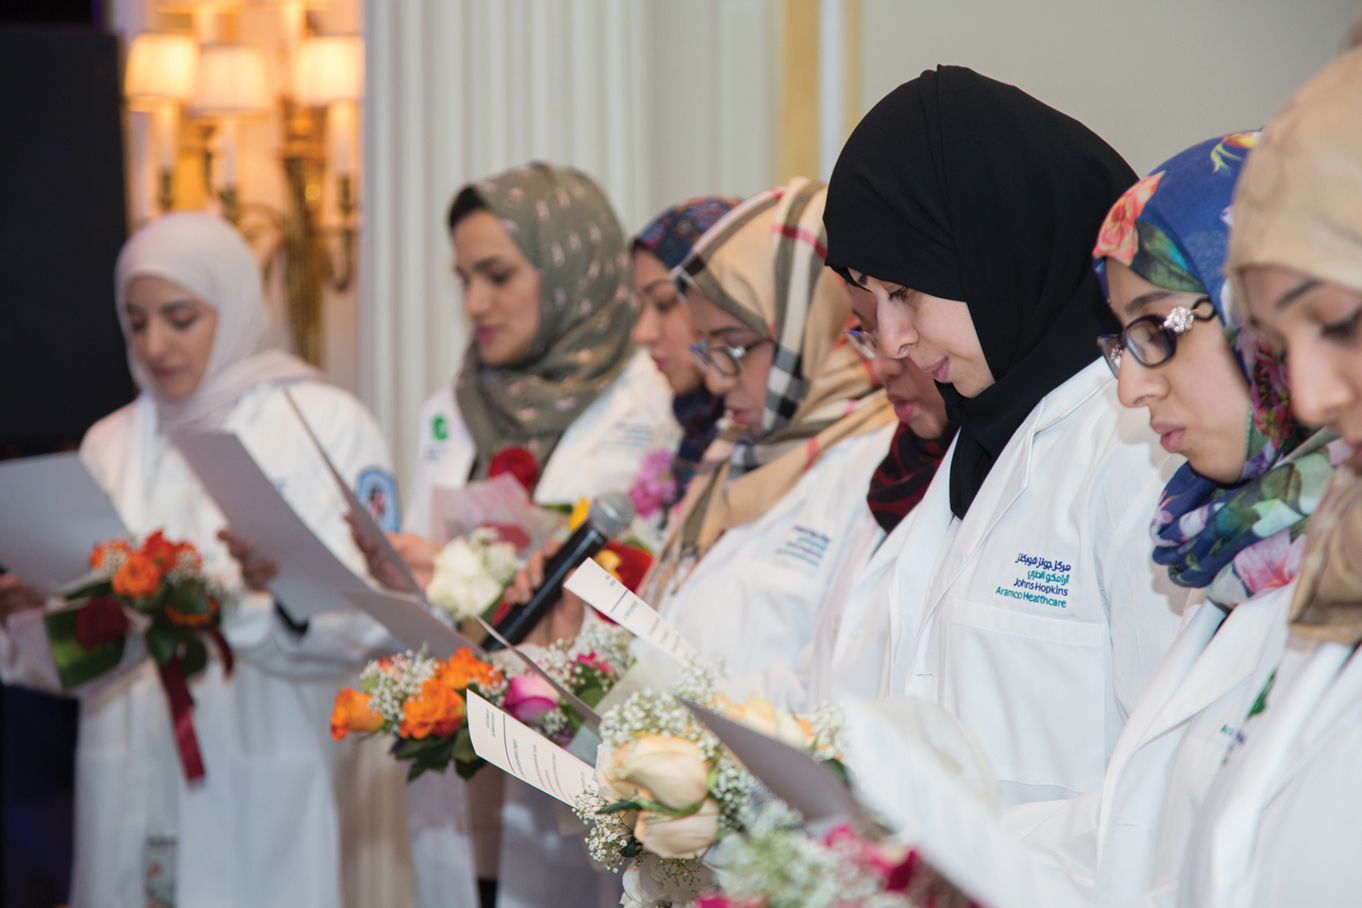 Doctor of nursing practice students in Saudi Arabia are welcomed with a White Coat Ceremony